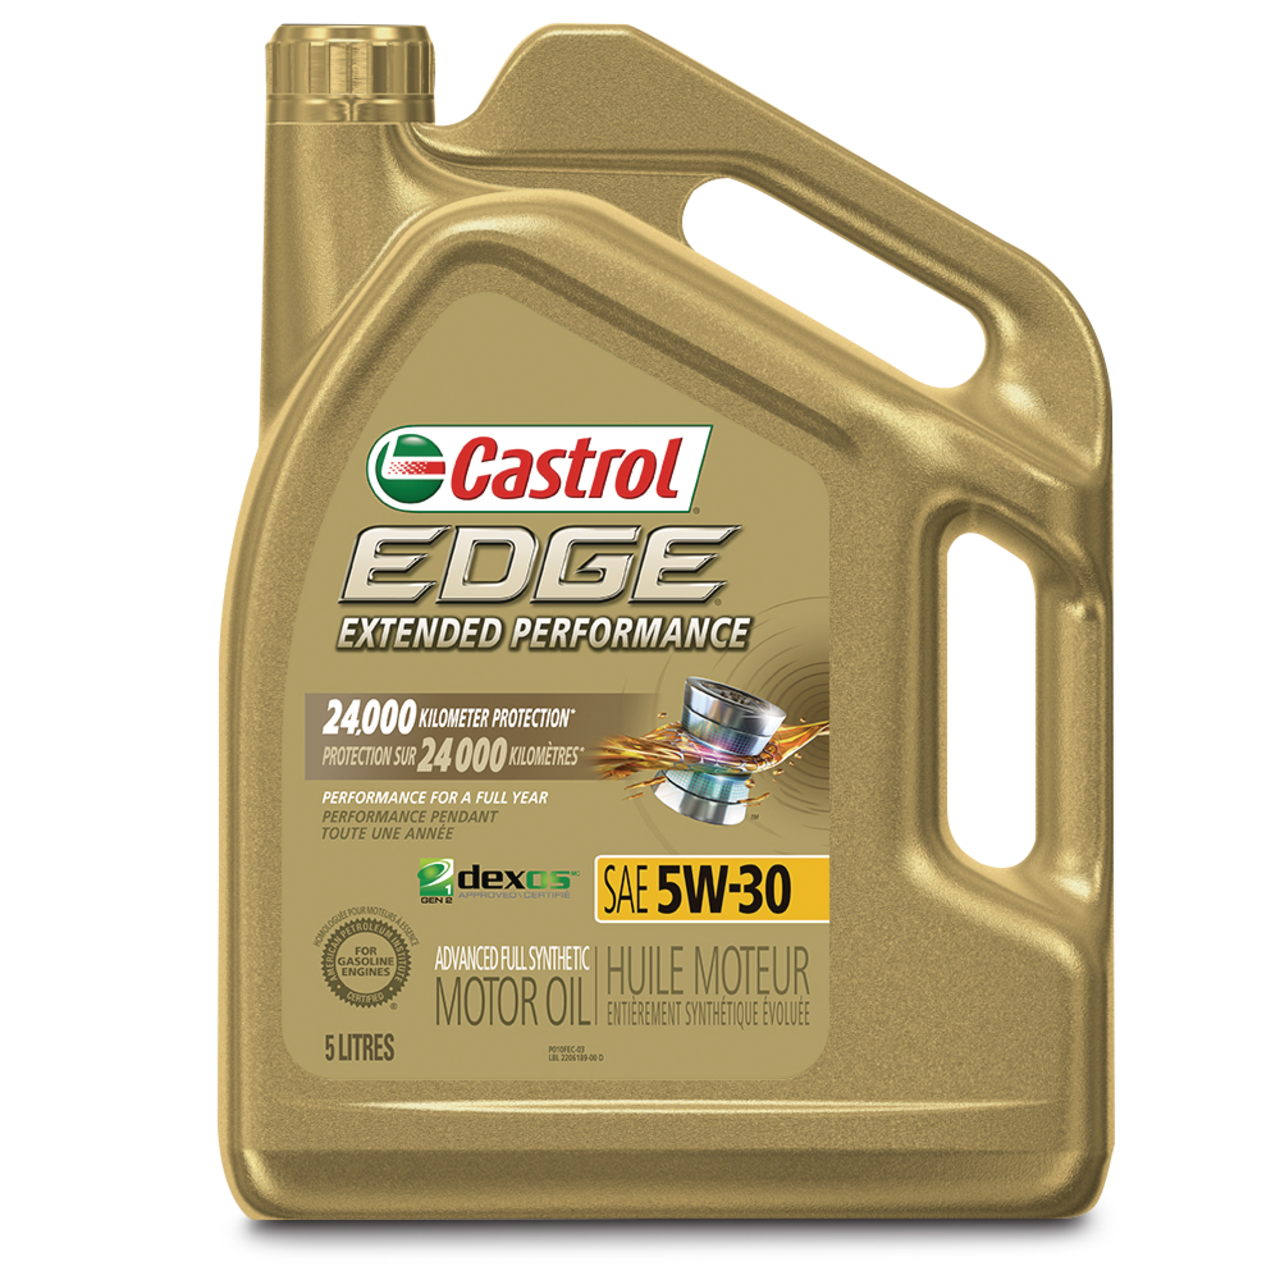 https://media-www.canadiantire.ca/product/automotive/auto-maintenance/oil-pcmo-/0289482/castrol-edge-5w30-extended-performance-synthetic-oil-5-l-72fff5e0-c18d-442e-953e-4358f2b7e8fe.png?imdensity=1&imwidth=640&impolicy=mZoom